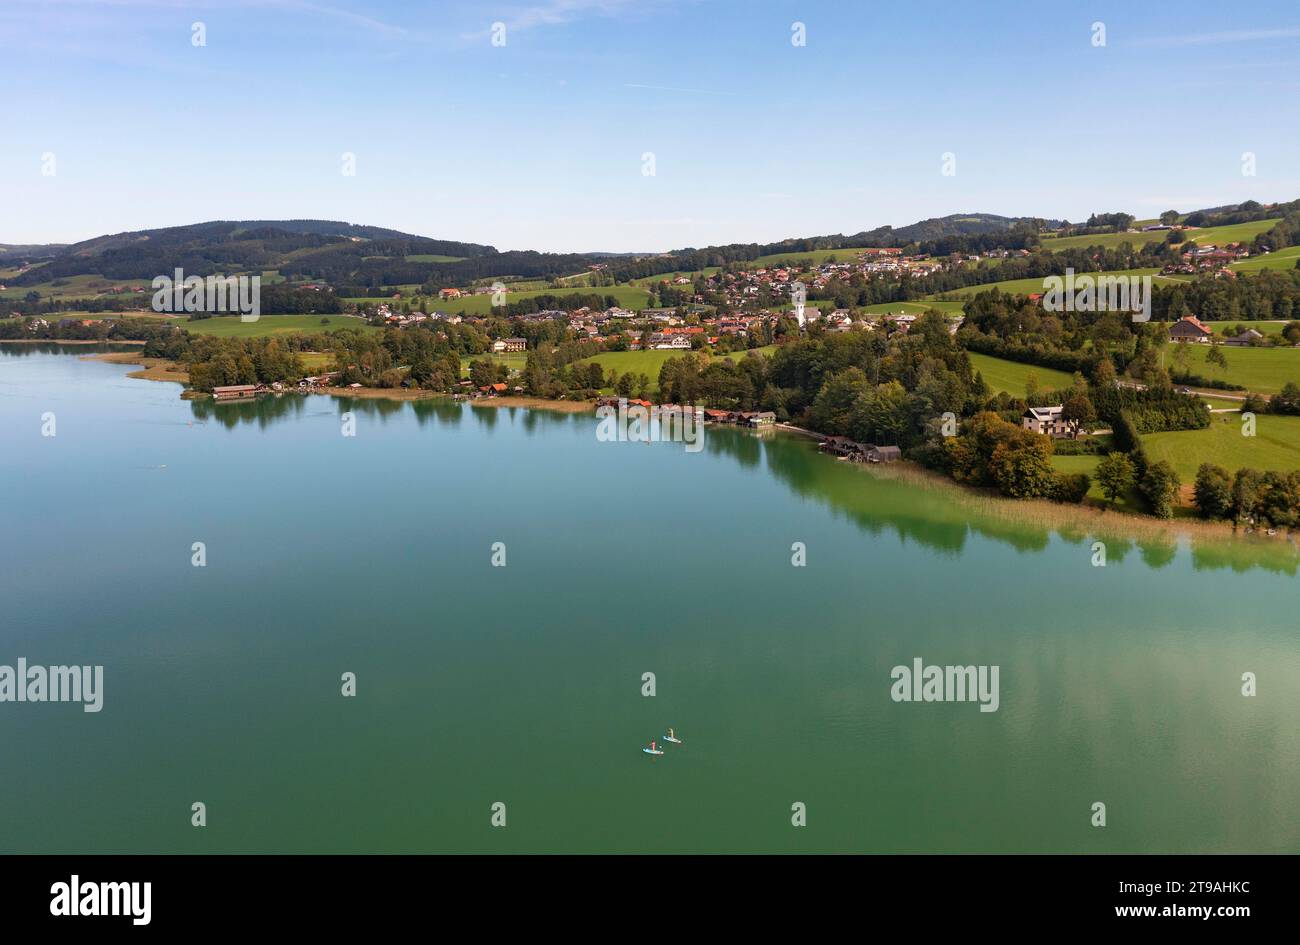 Drone image, Irrsee with the village of Zell am moss, Salzkammergut, Upper Austria, Austria Stock Photo